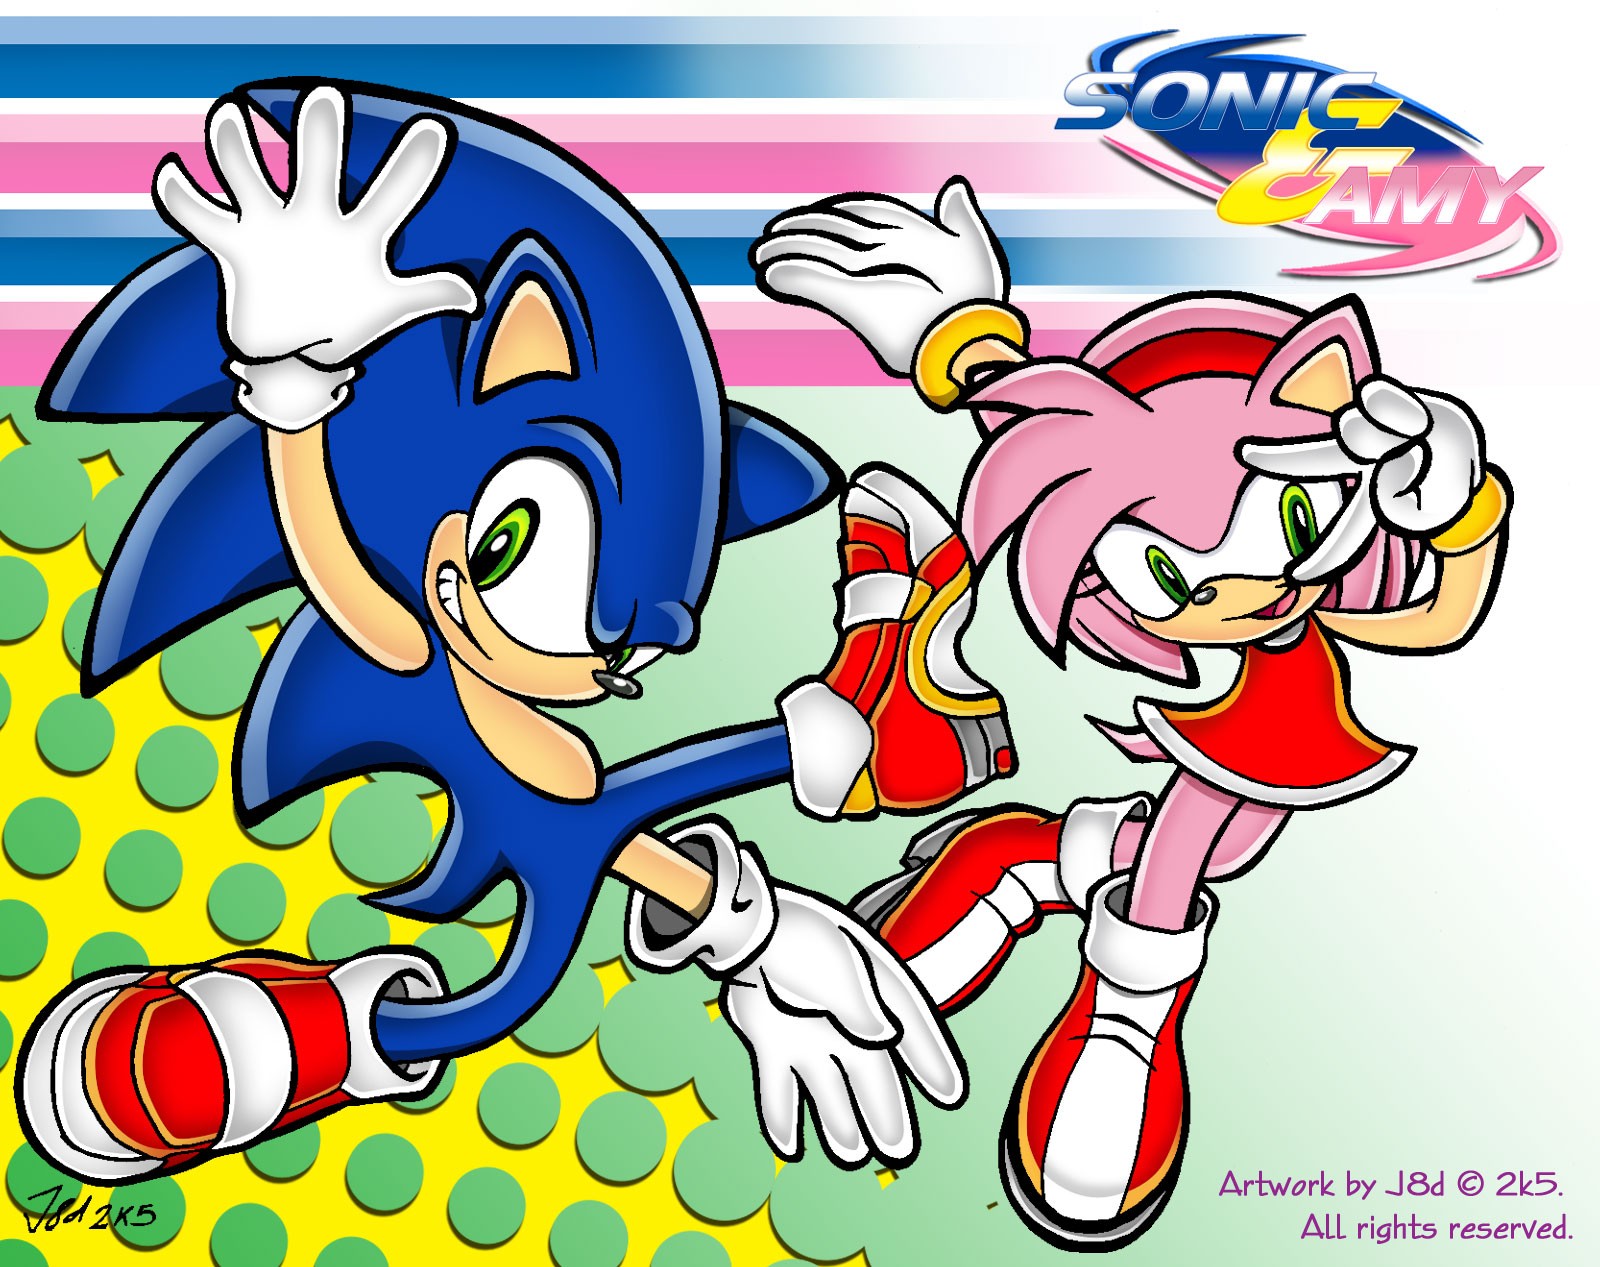 General 1600x1267 video games Sonic the Hedgehog fan art video game characters Amy Rose watermarked